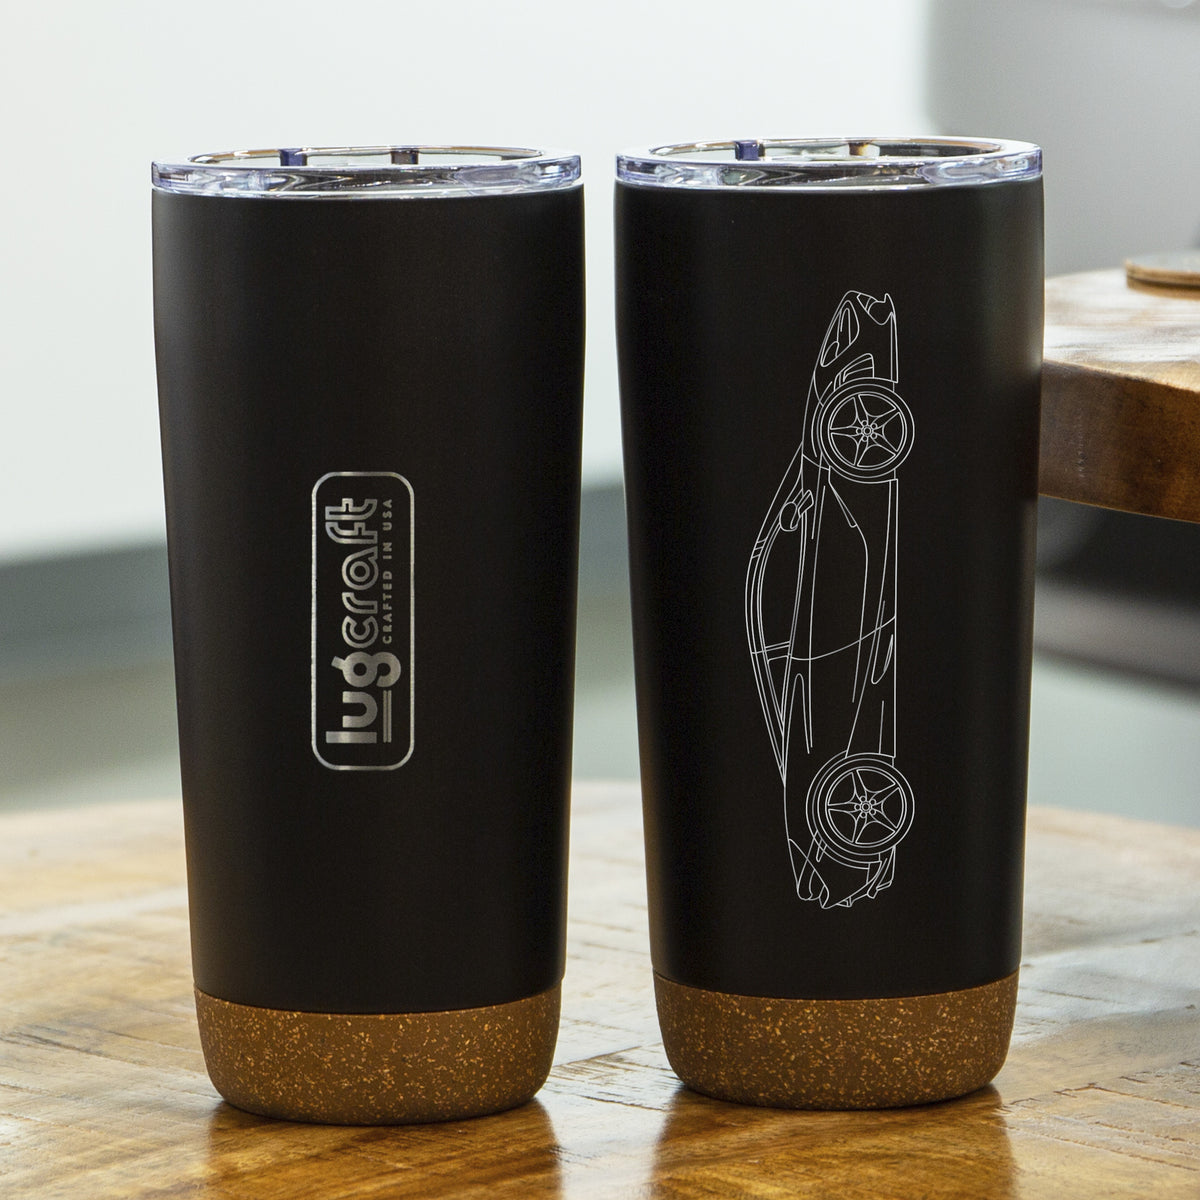 McLaren 720S Insulated Stainless Steel Coffee Tumbler - 20 oz